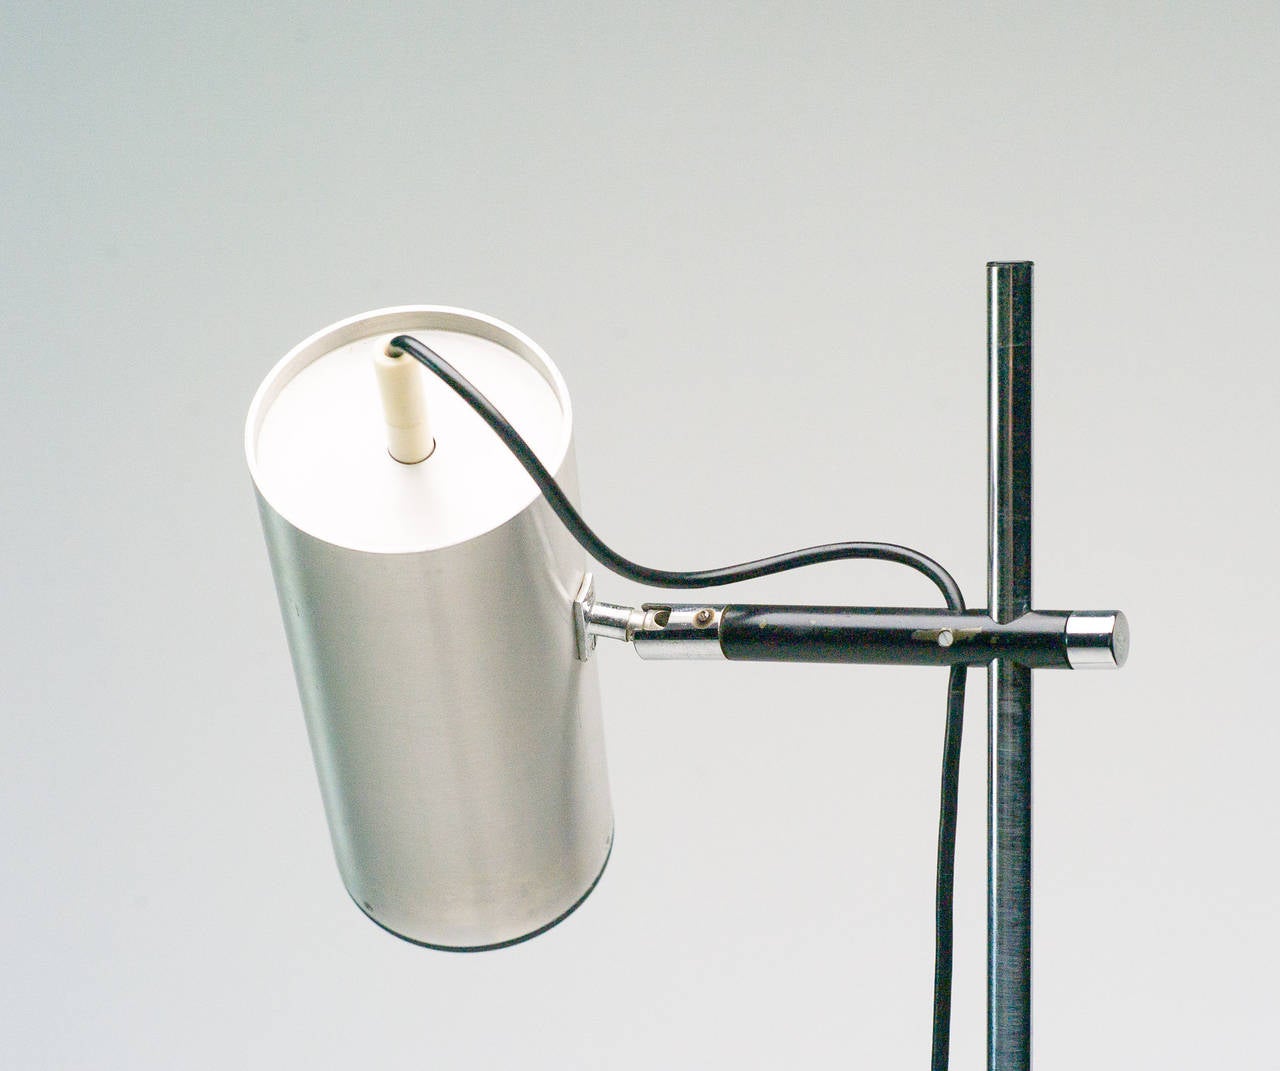 Designed in 1968 and manufactured by Uginox for Ugine-Gueugnon, this stainless steel floor lamp is constructed from a circular, black enameled metal base and stainless steel stem. An elegant and refined fixture, this item features a sliding branch